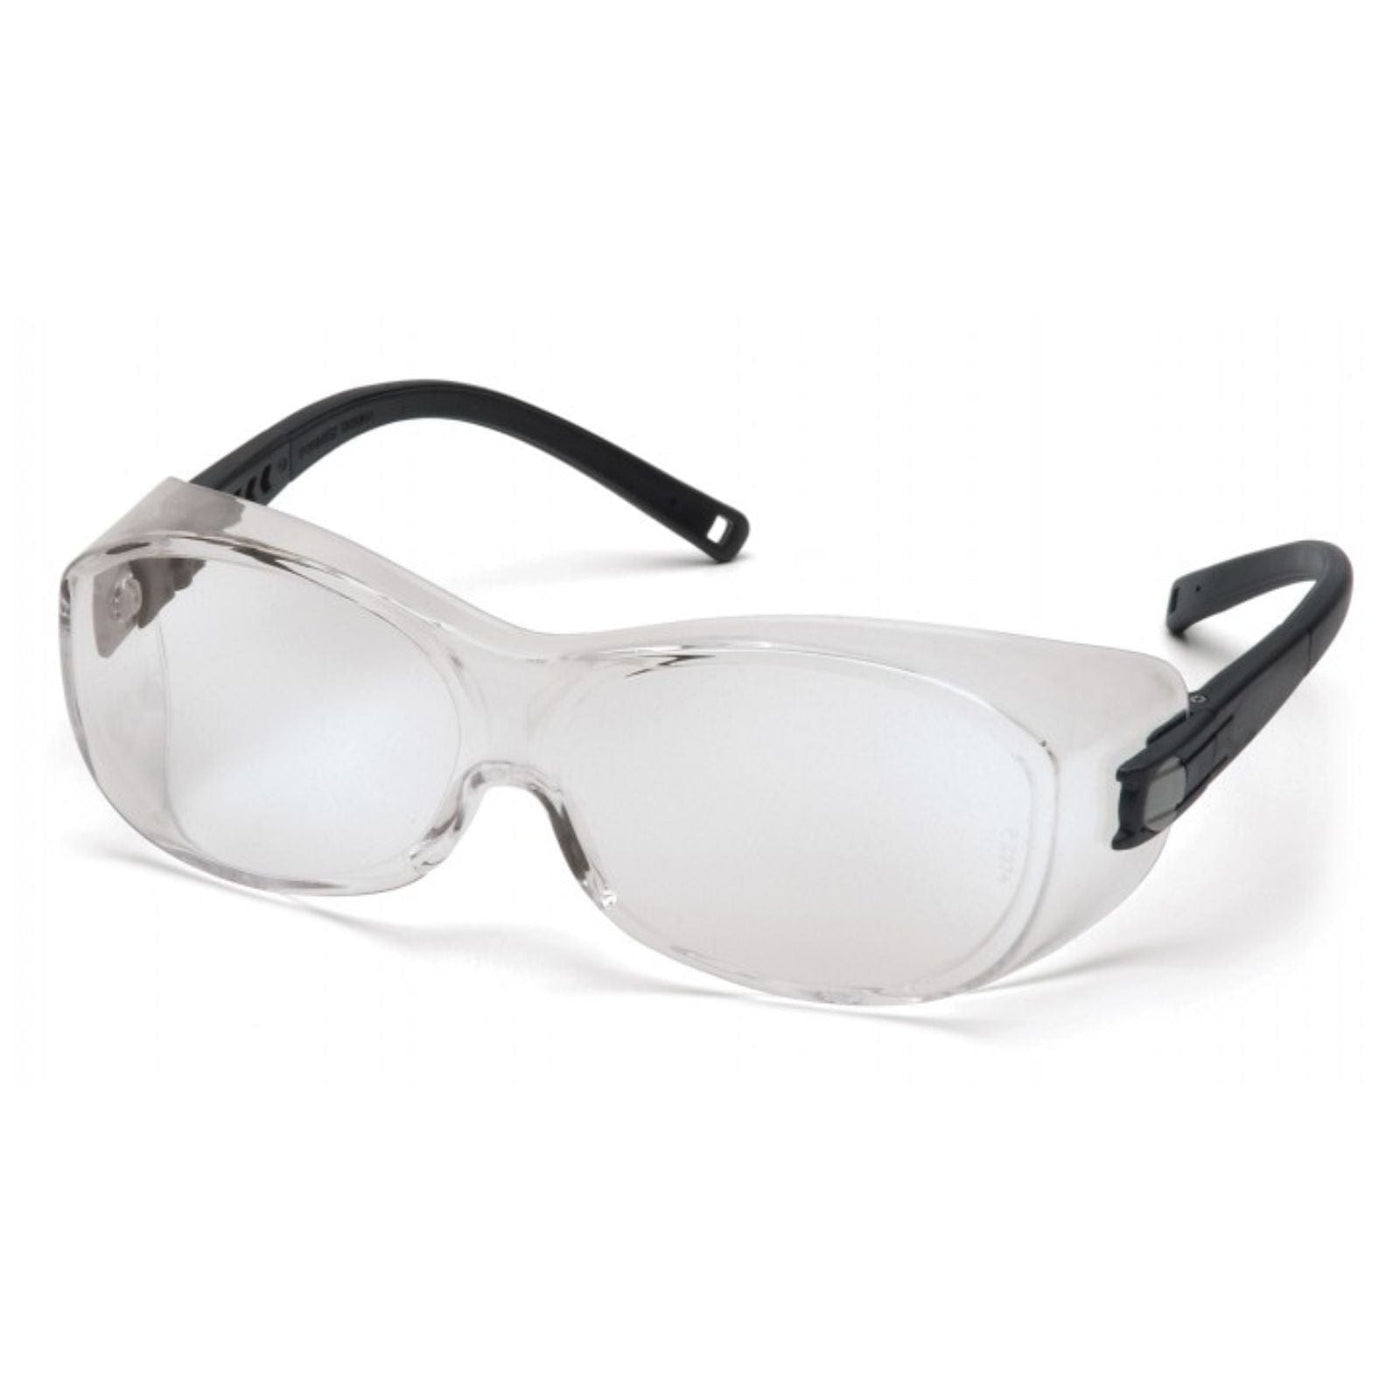 PYRAMEX SAFETY PRODUCTS Pyramex OTS Safety Glasses Black Frame Clear Lens Apparel